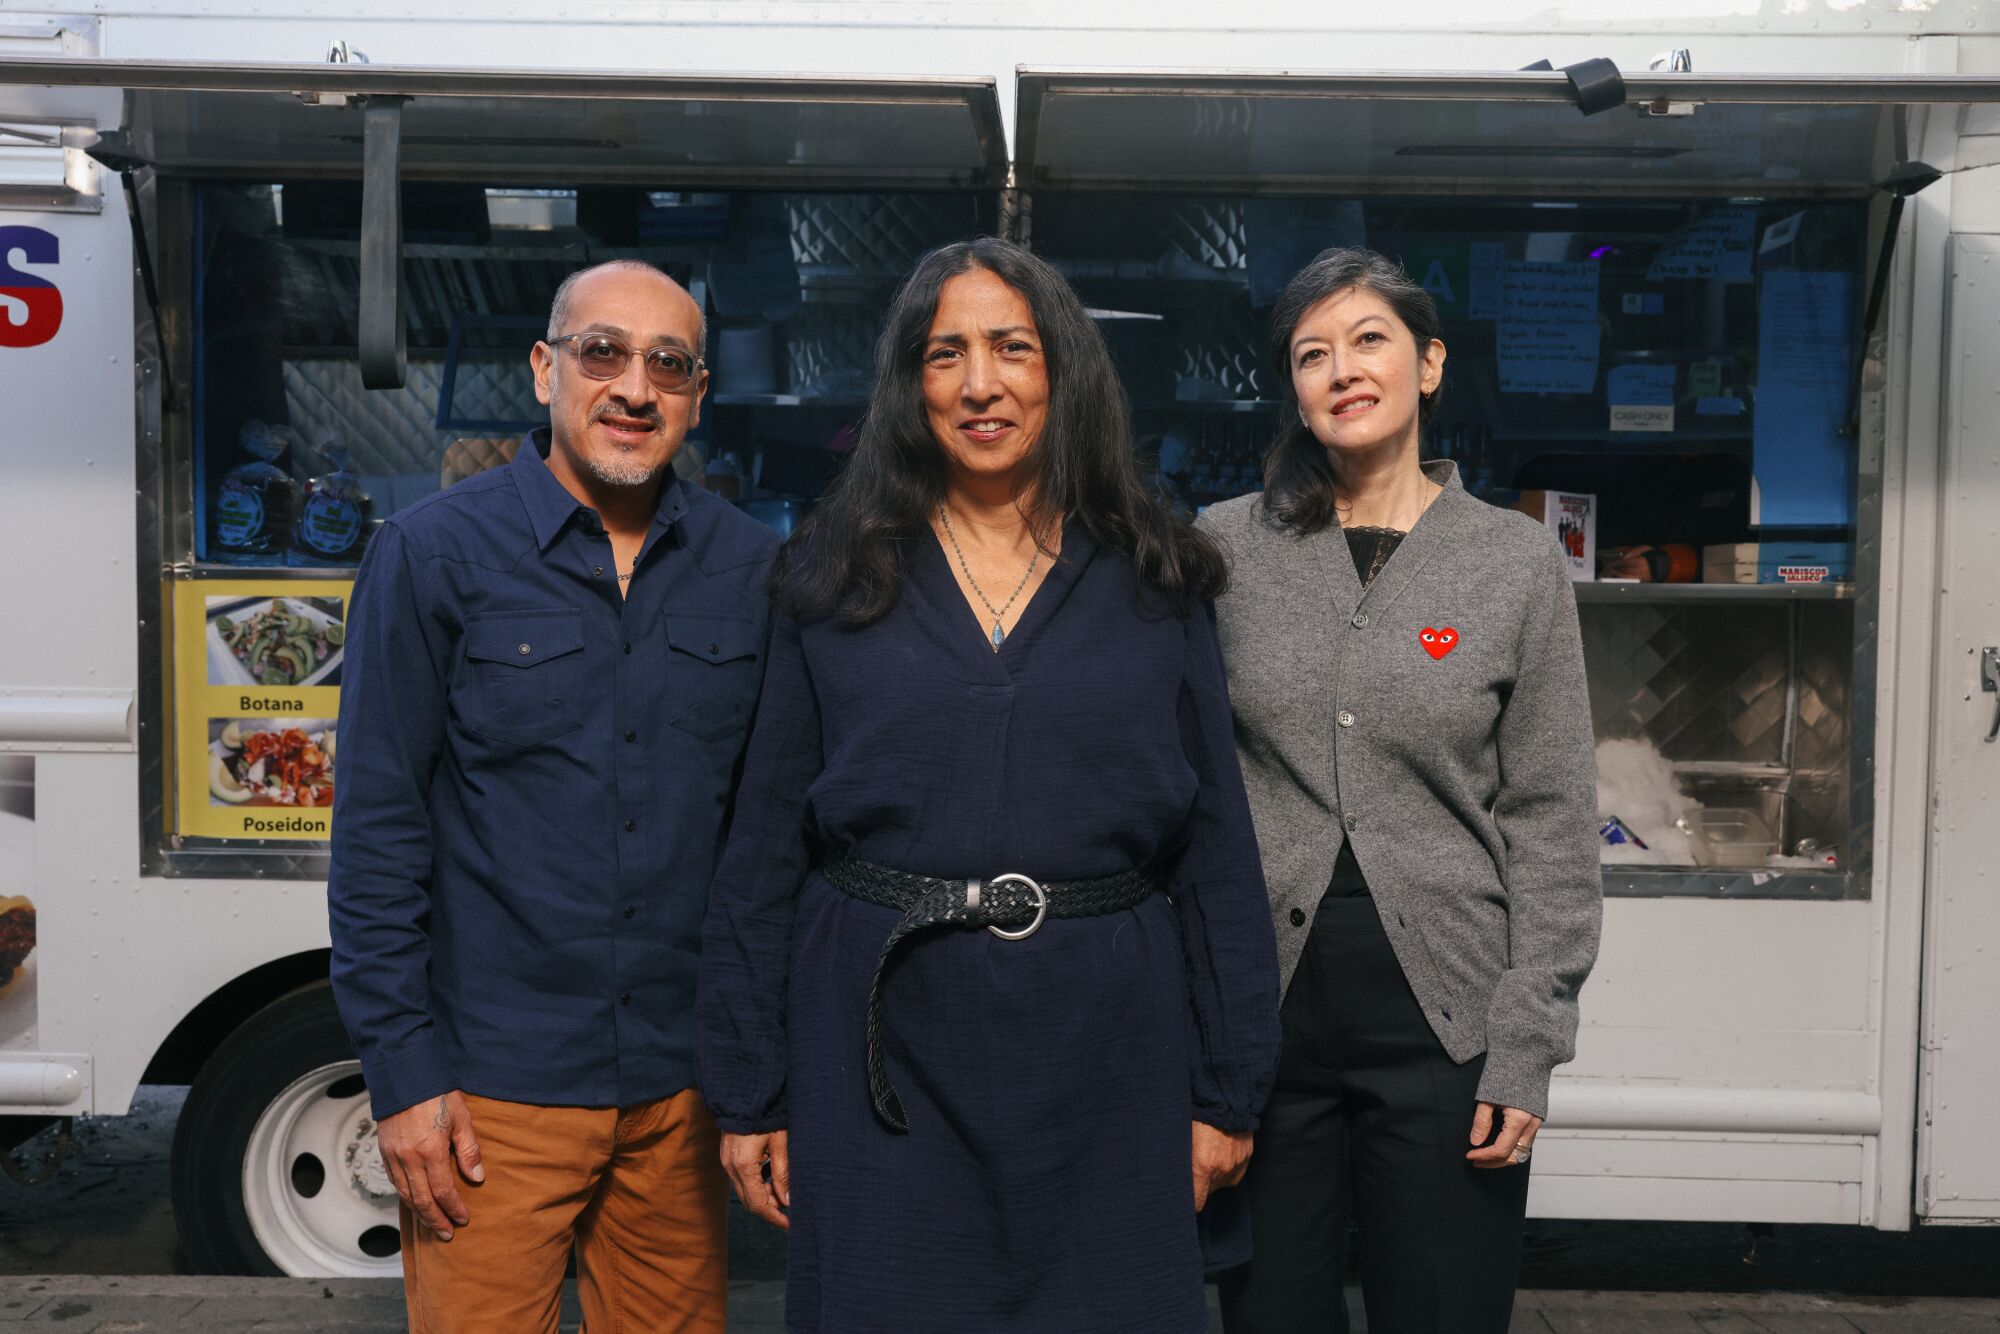 A man and two women pose for a picture in front of a food truck.